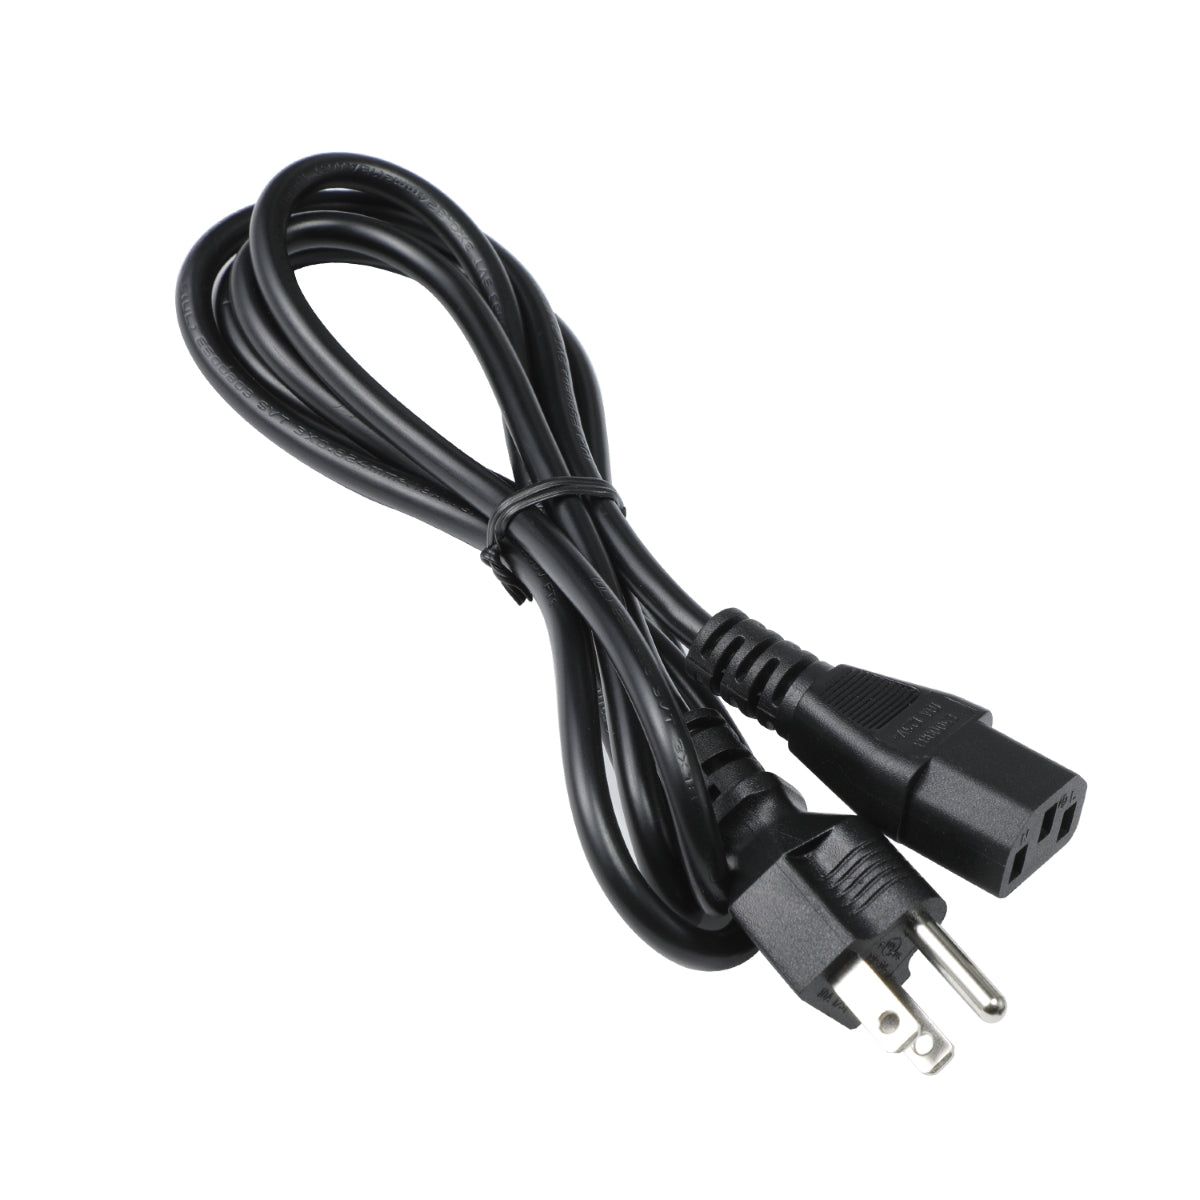 Power Cable for Philips 328E1CA/27 Curved LCD Monitor.